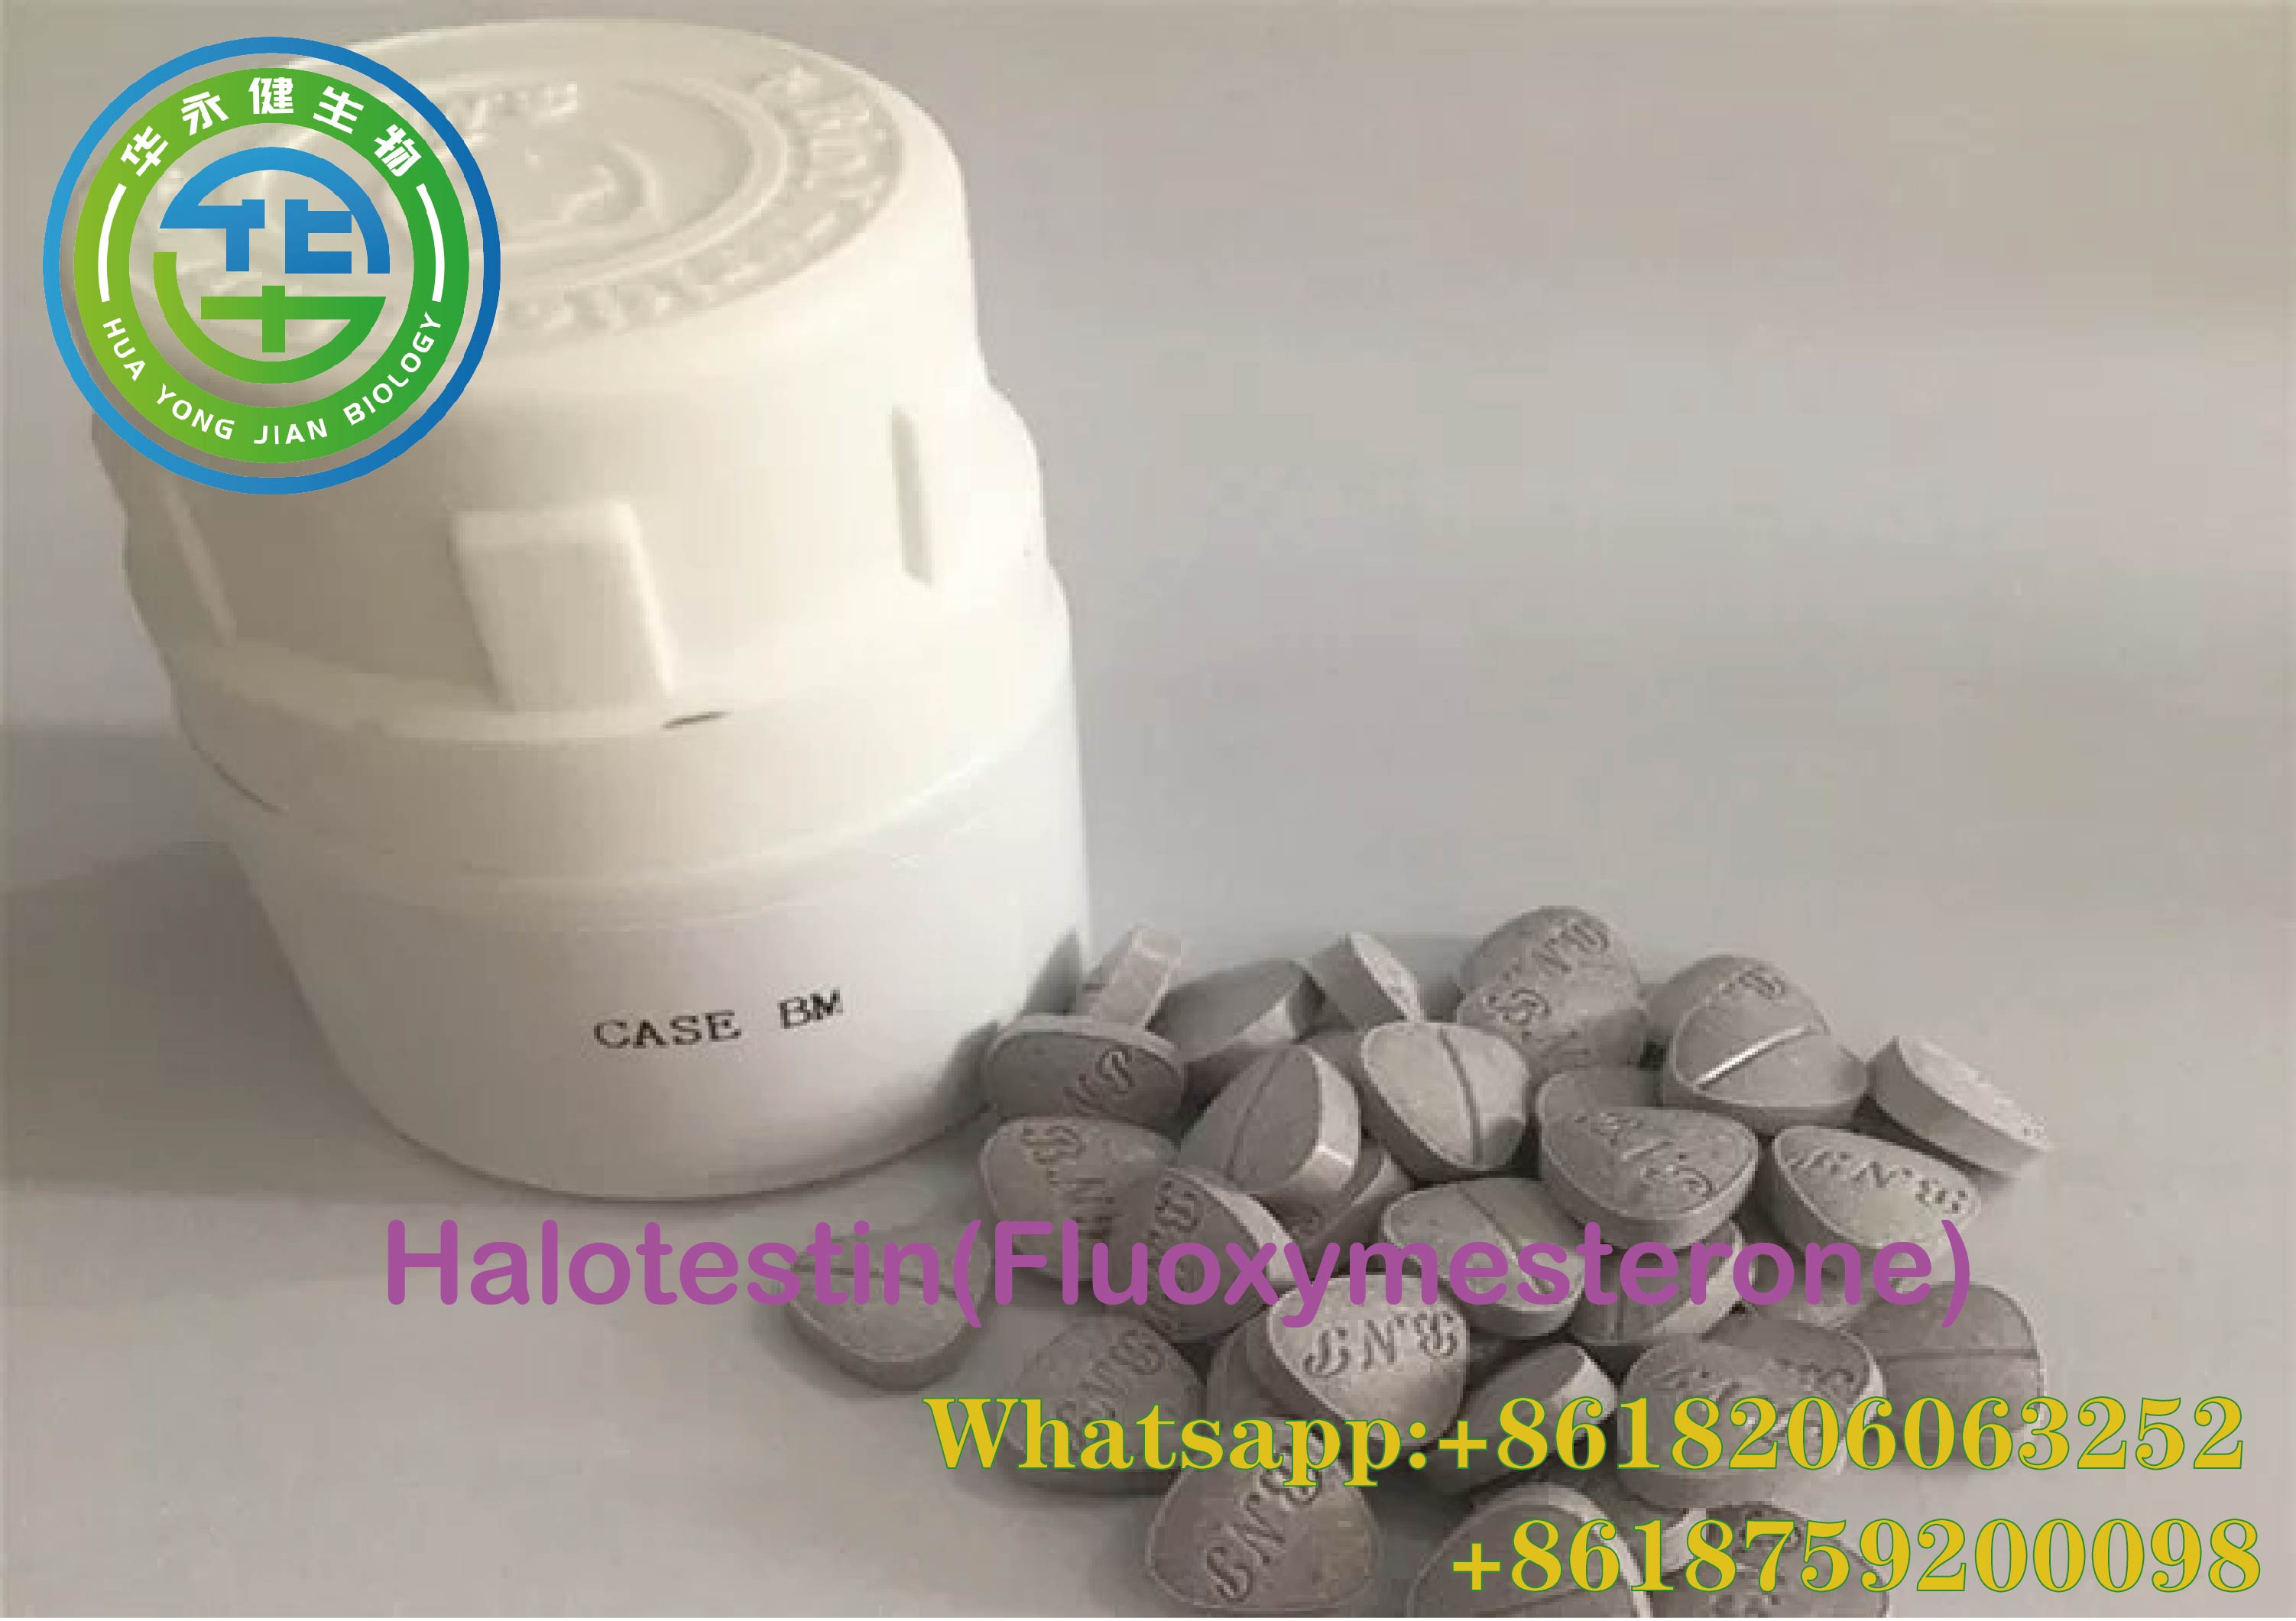  Fluoxymesterone 10mg Powder For Cancer Treatment Halotestin 100Pic/bottle CAS 54965-24-1